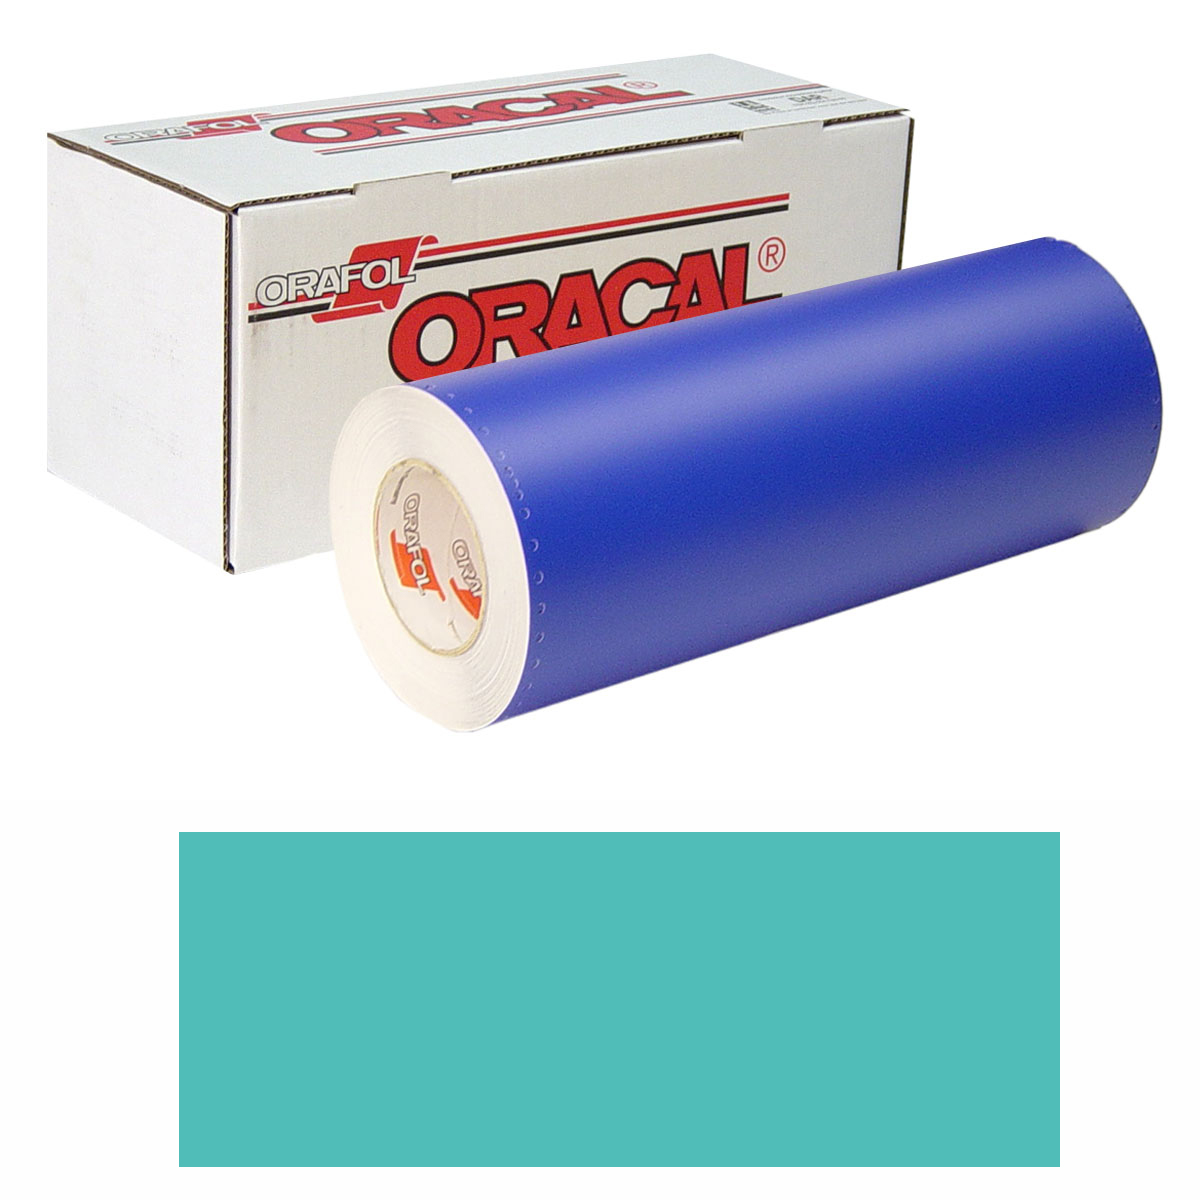 ORACAL 8300 Unp 48in X 10yd 054 Turquoise